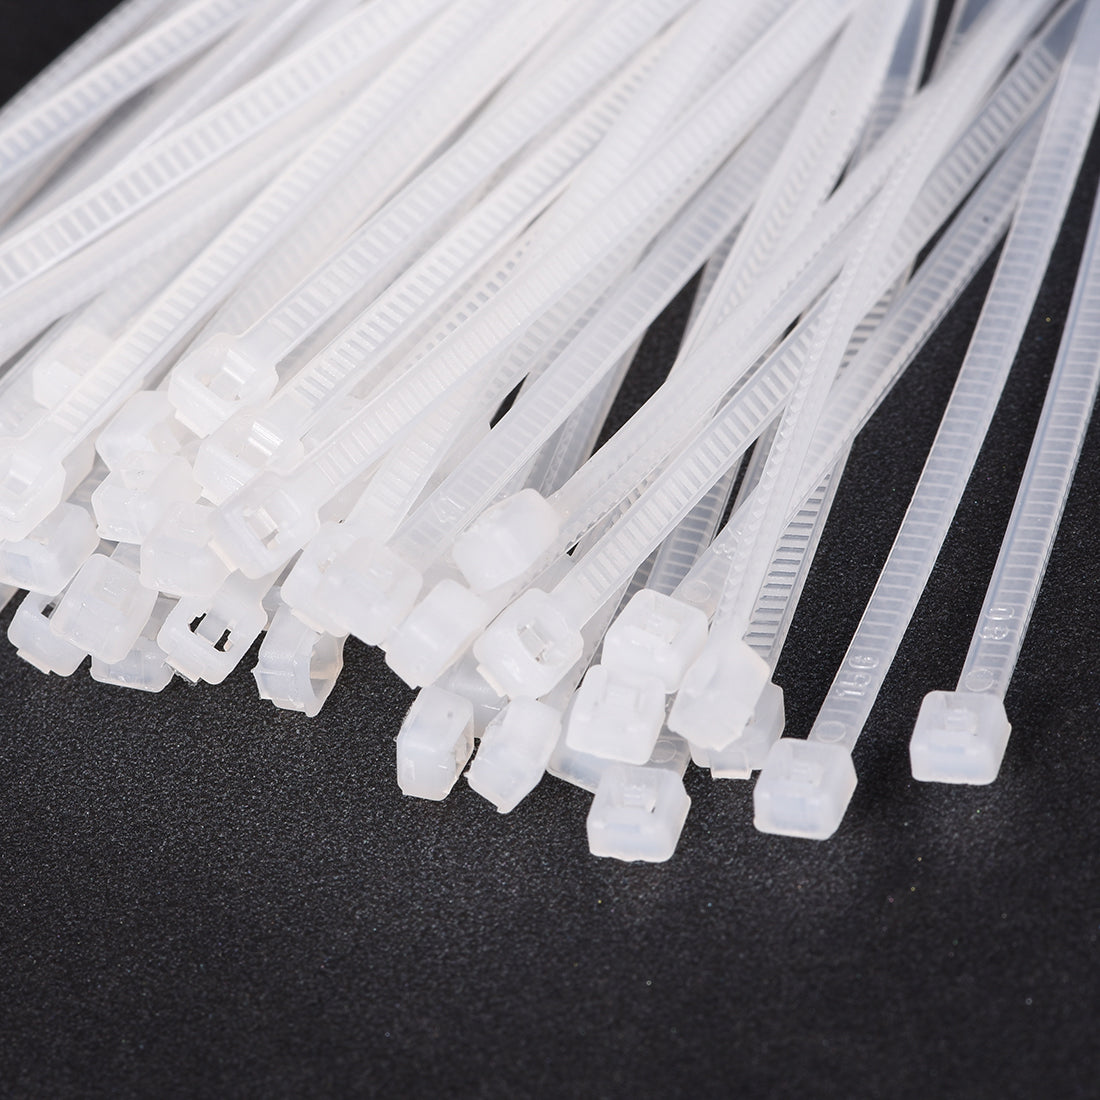 uxcell Uxcell Cable Zip Ties 120mmx1.8mm Self-Locking Nylon Tie Wraps White 700pcs